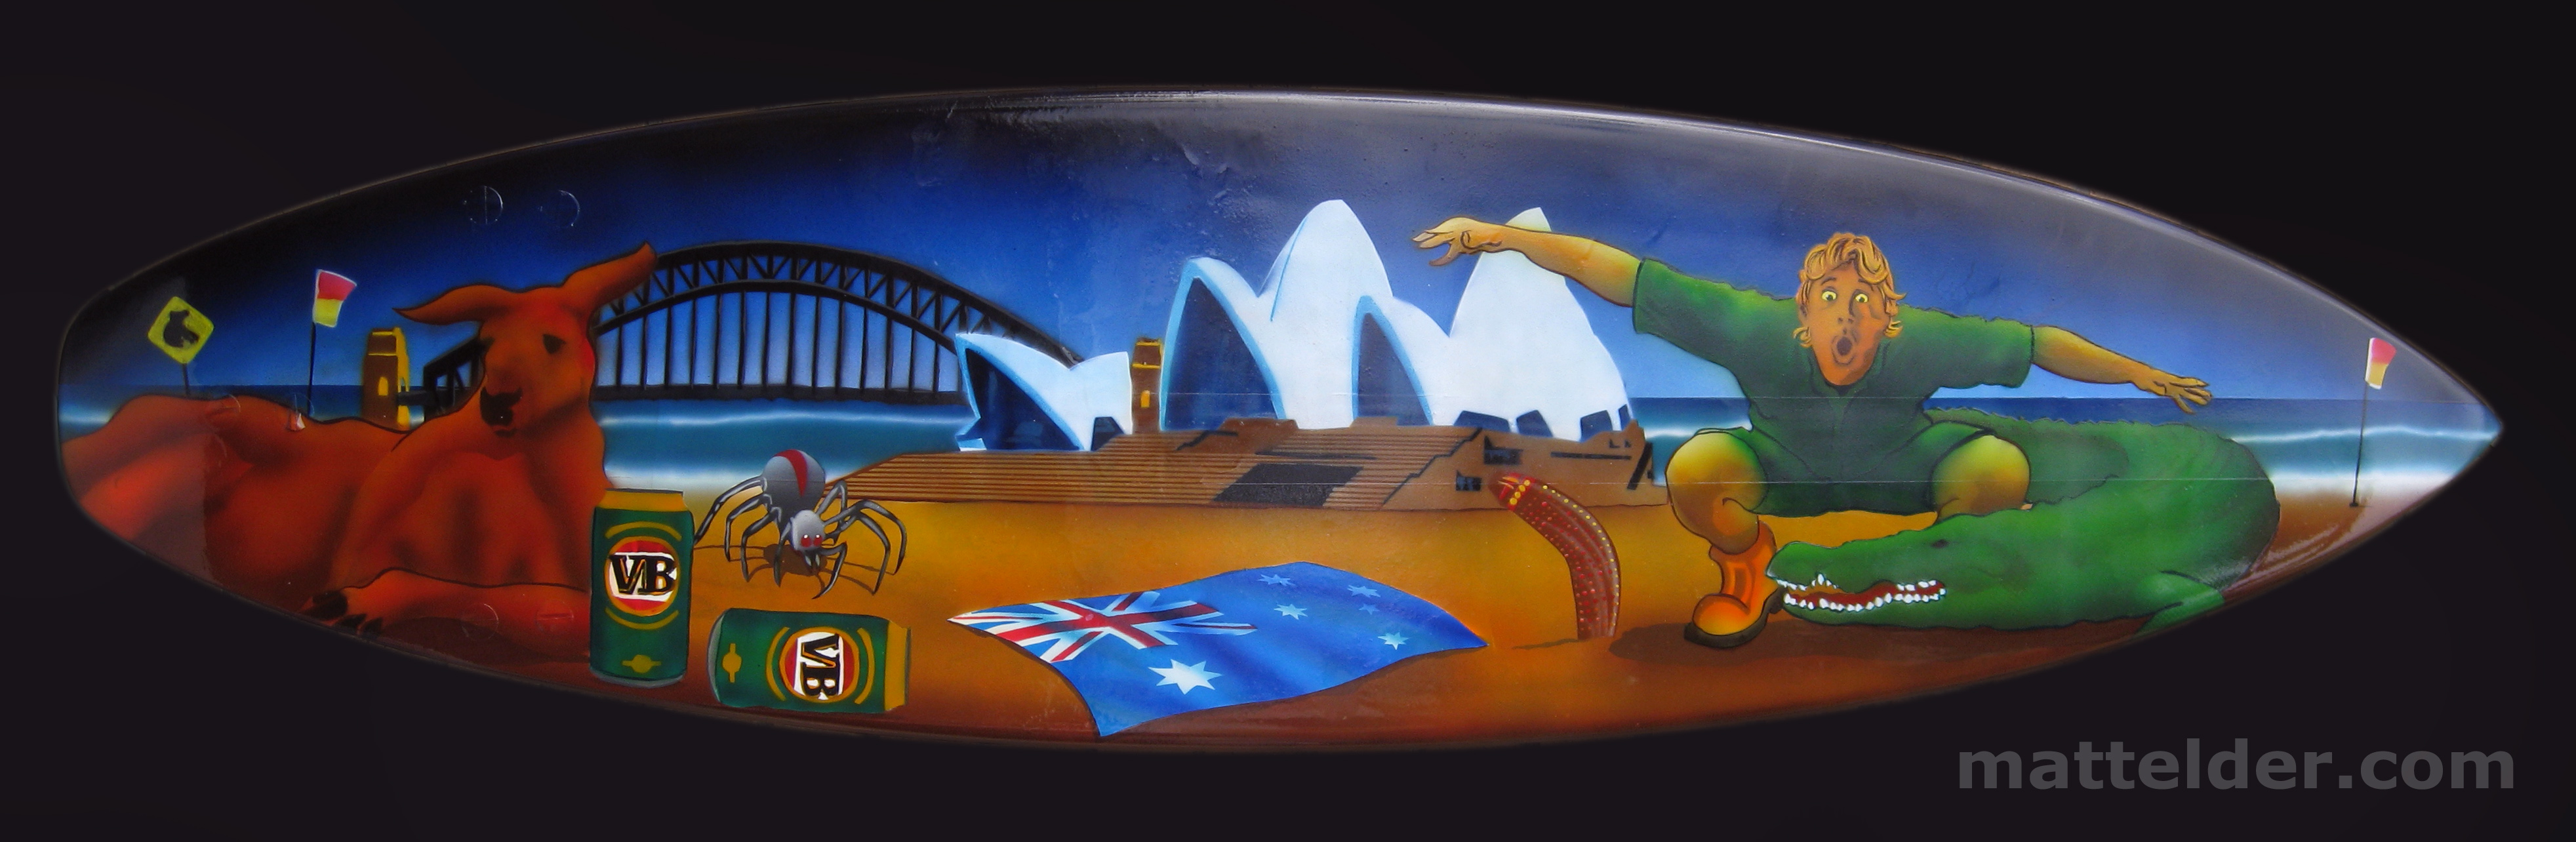 Australiana Between the Flags Airbrushed Surfboard